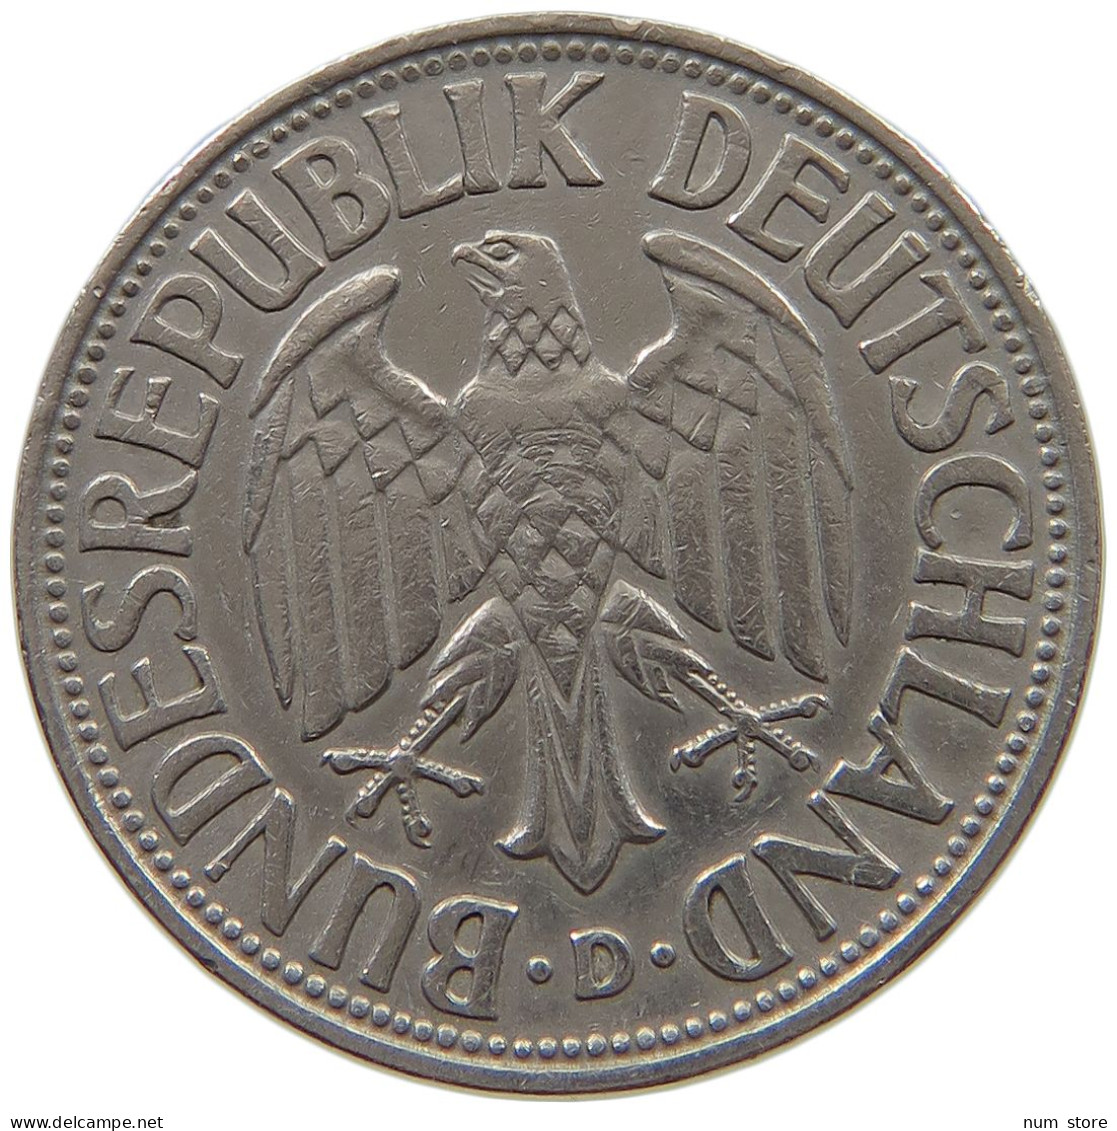 GERMANY WEST 1 MARK 1959 D #a072 0251 - 1 Mark